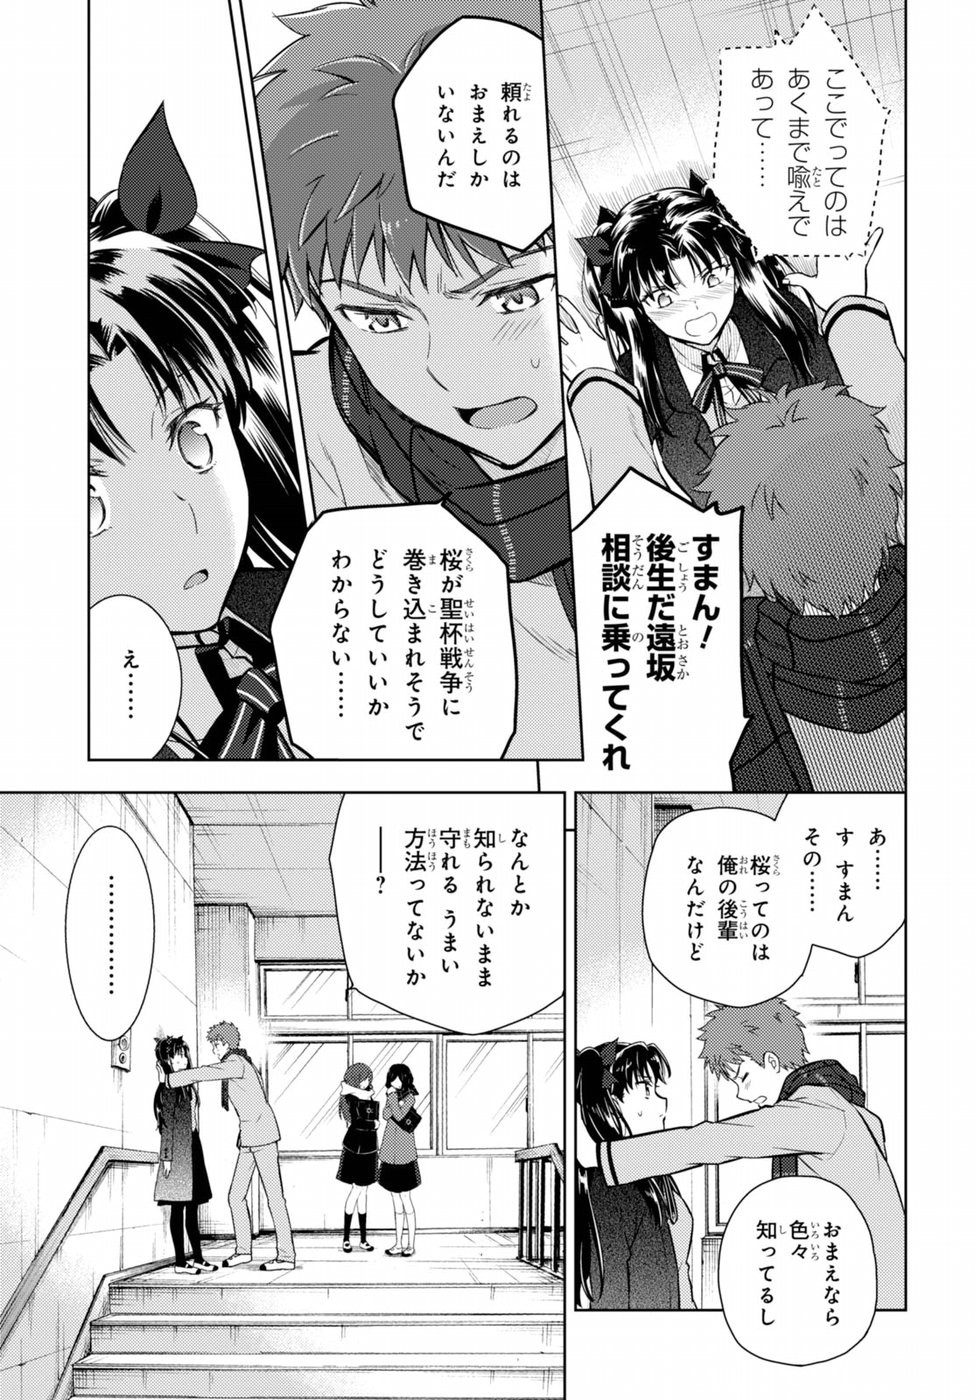 Fate/Stay night Heaven's Feel - Chapter 22 - Page 5